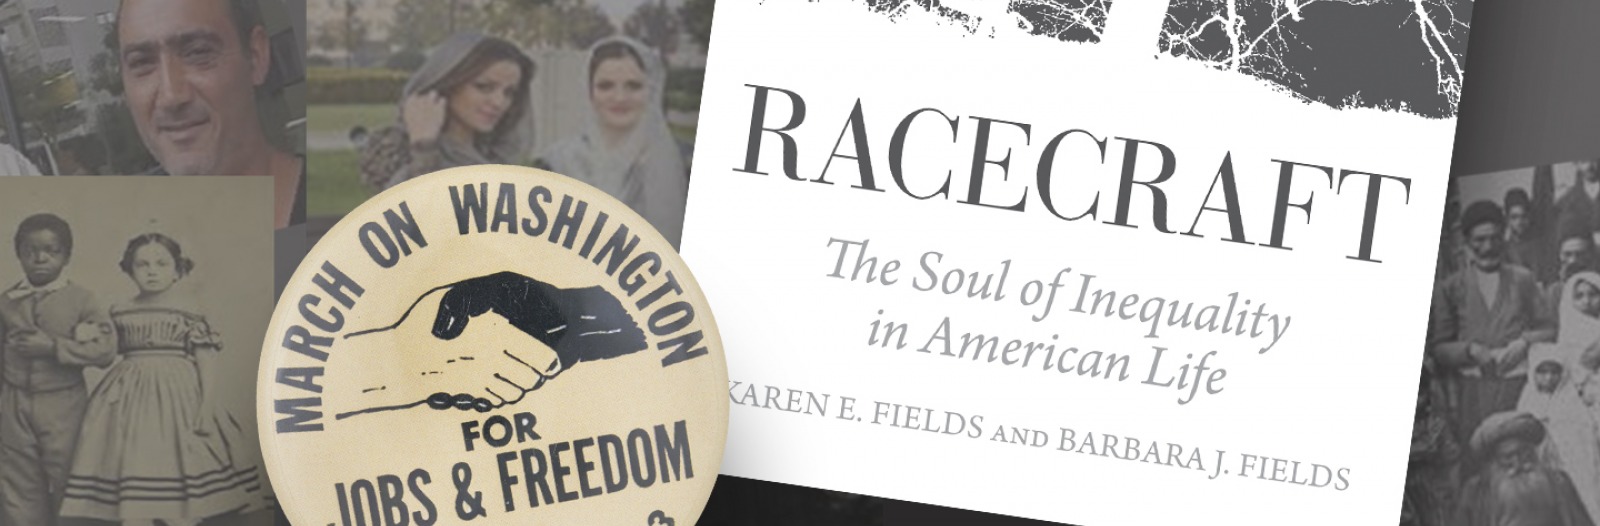 A collage showing a 1963 "March on Washington for jobs and freedom" button and part of a book cover with the title "Racecraft" over historic images of people of color